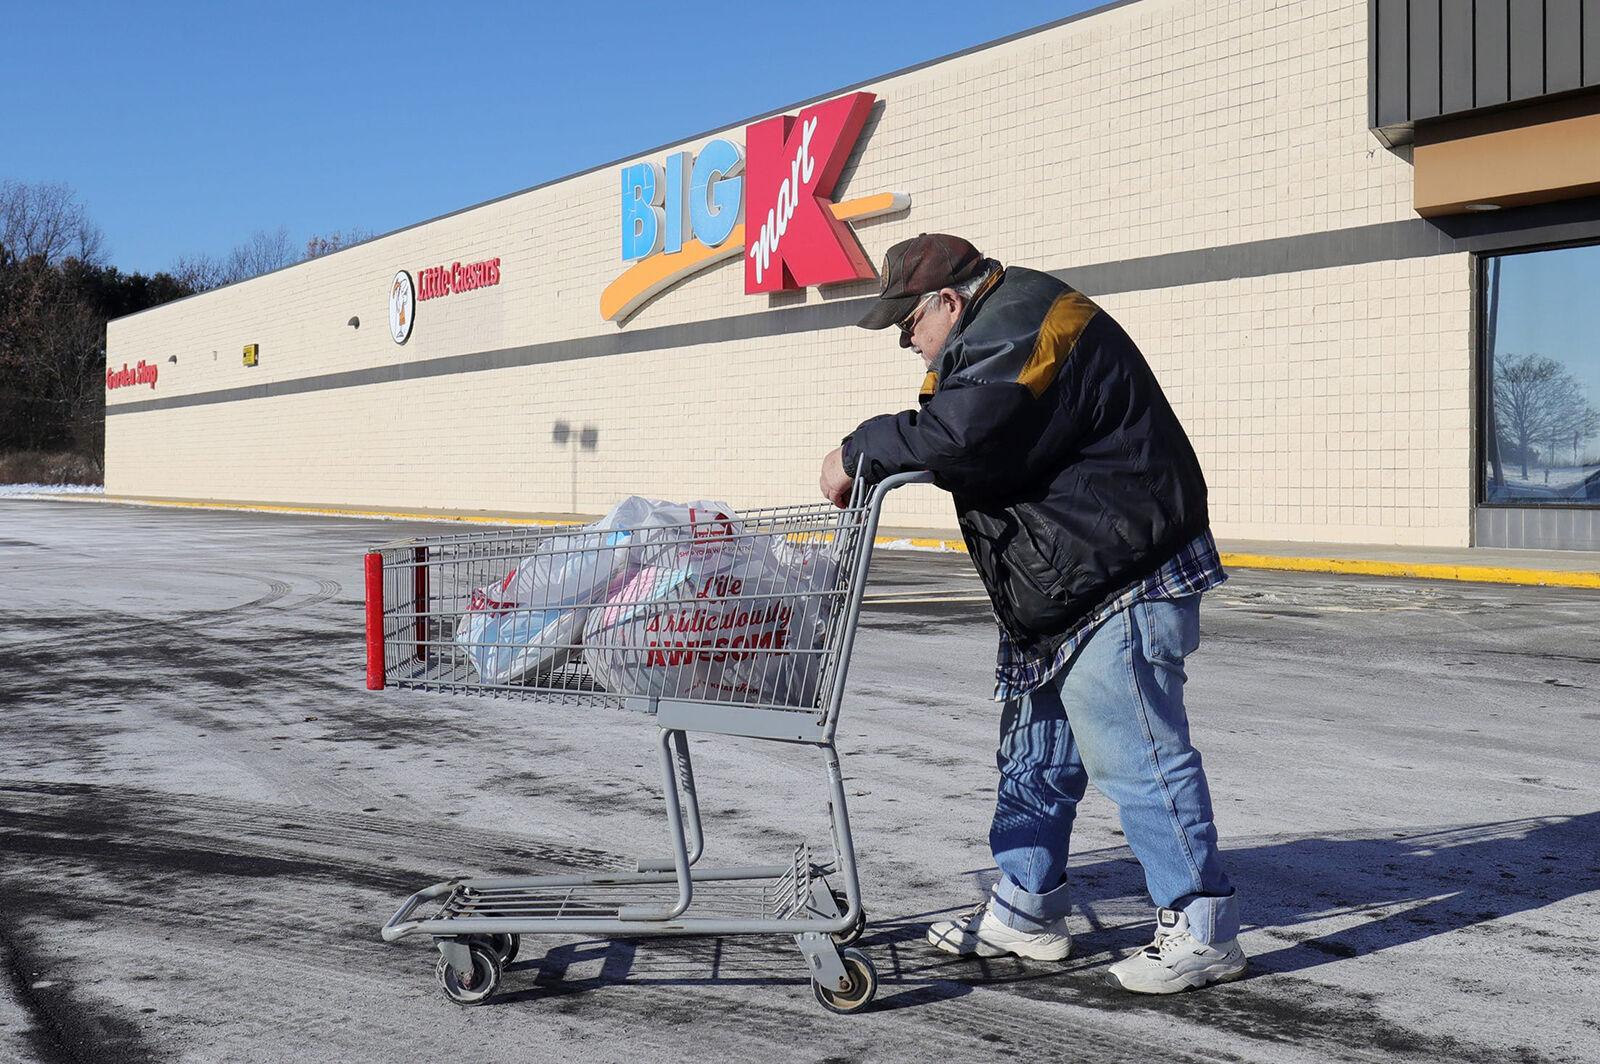 Owner of old Kmart headquarters in Troy: Not any new use will do